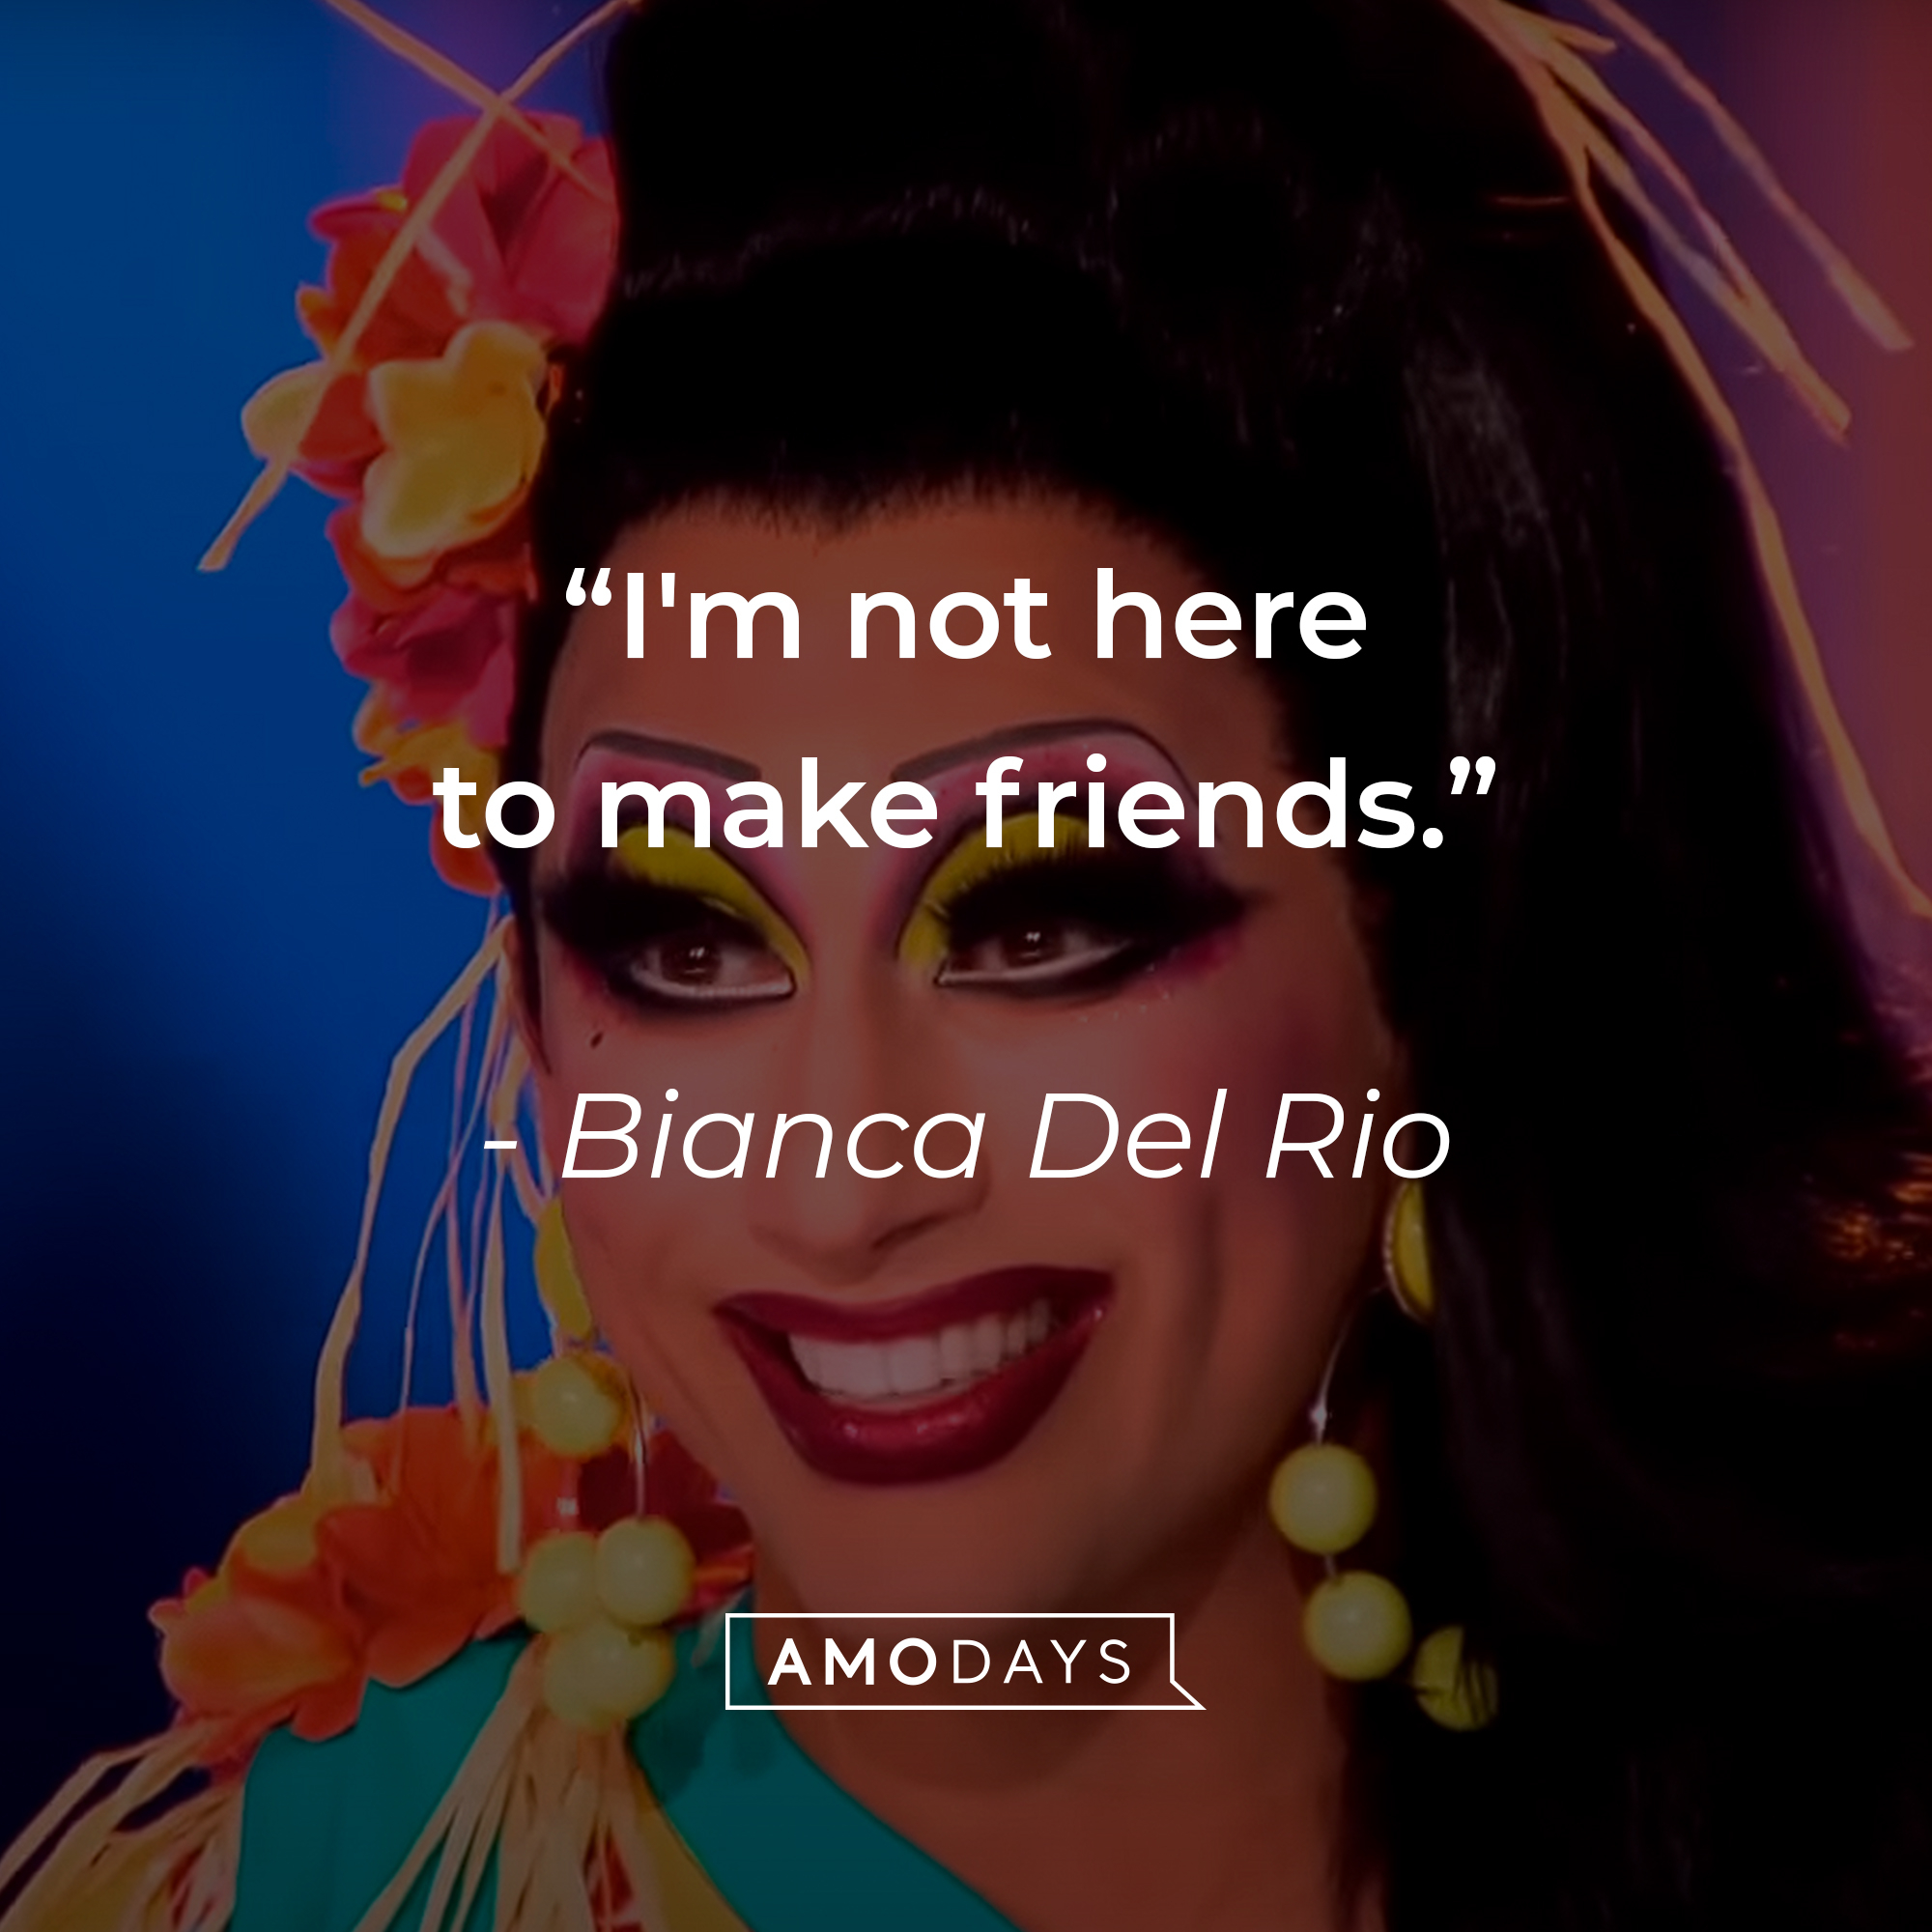 Bianca Del Rio's quote: “I'm not here to make friends.” | Source: youtube.com/rupaulsdragrace